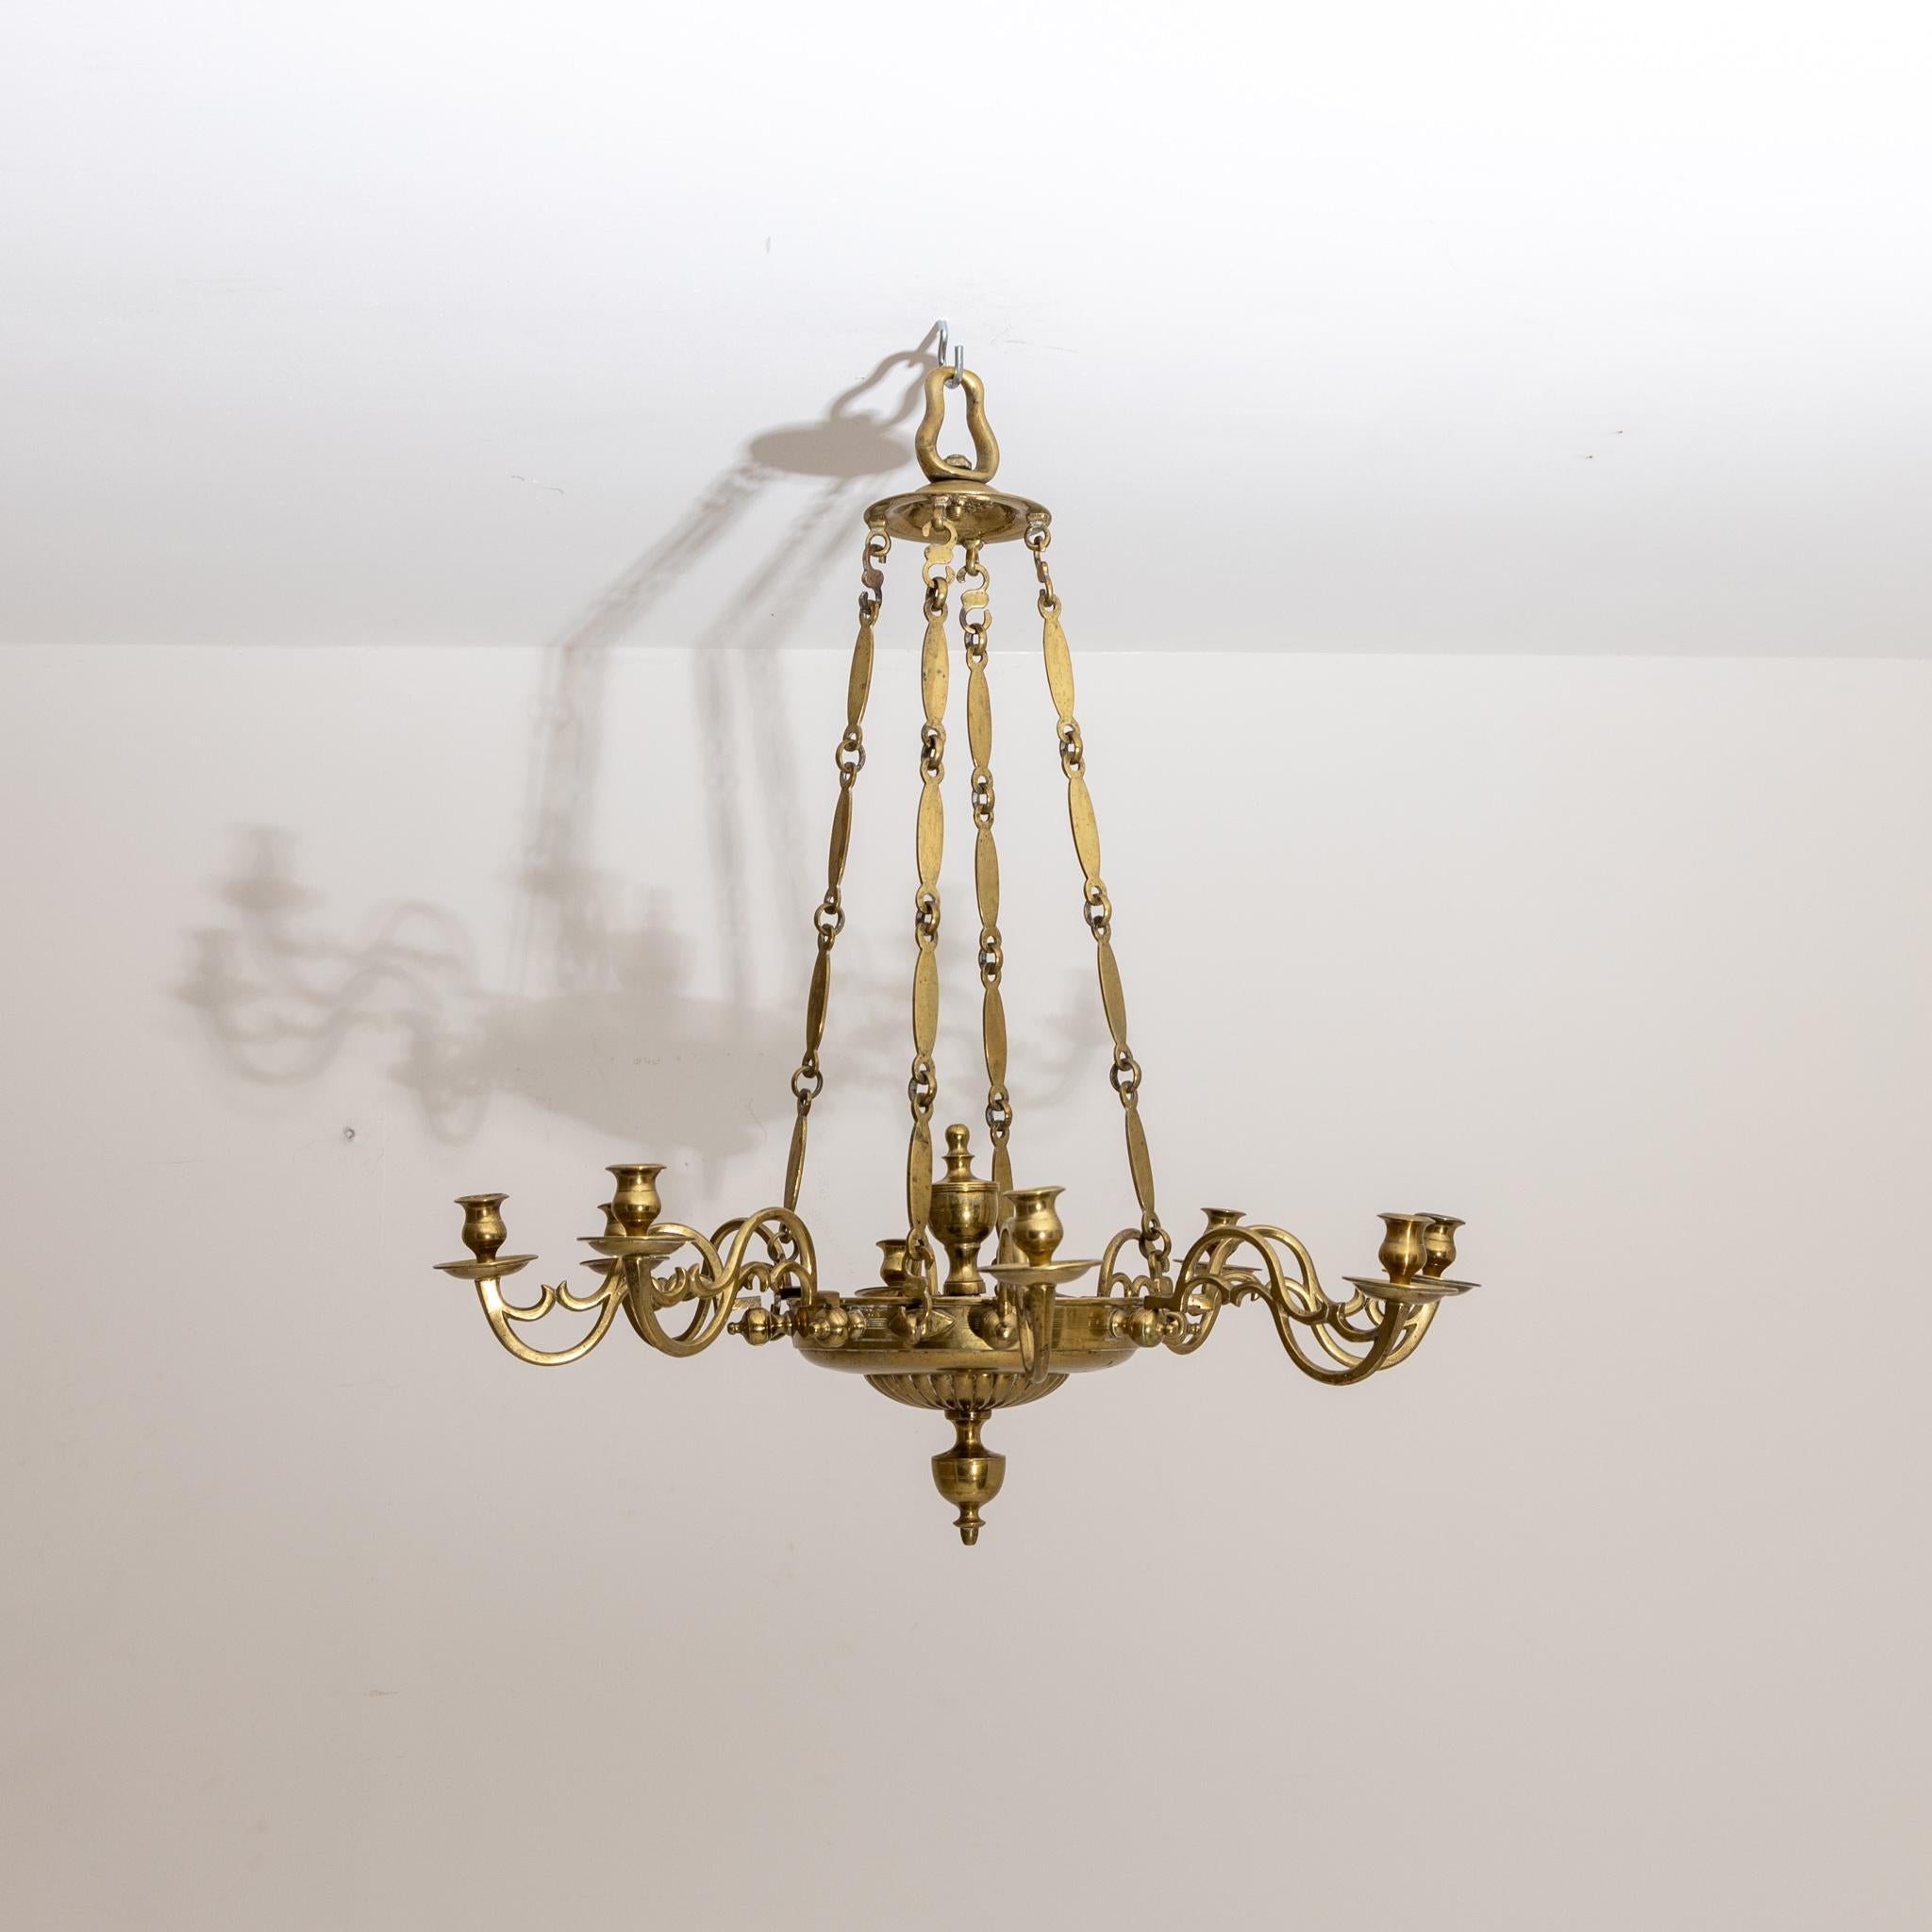 Large ceiling chandelier with eight arms and brass candle spouts.